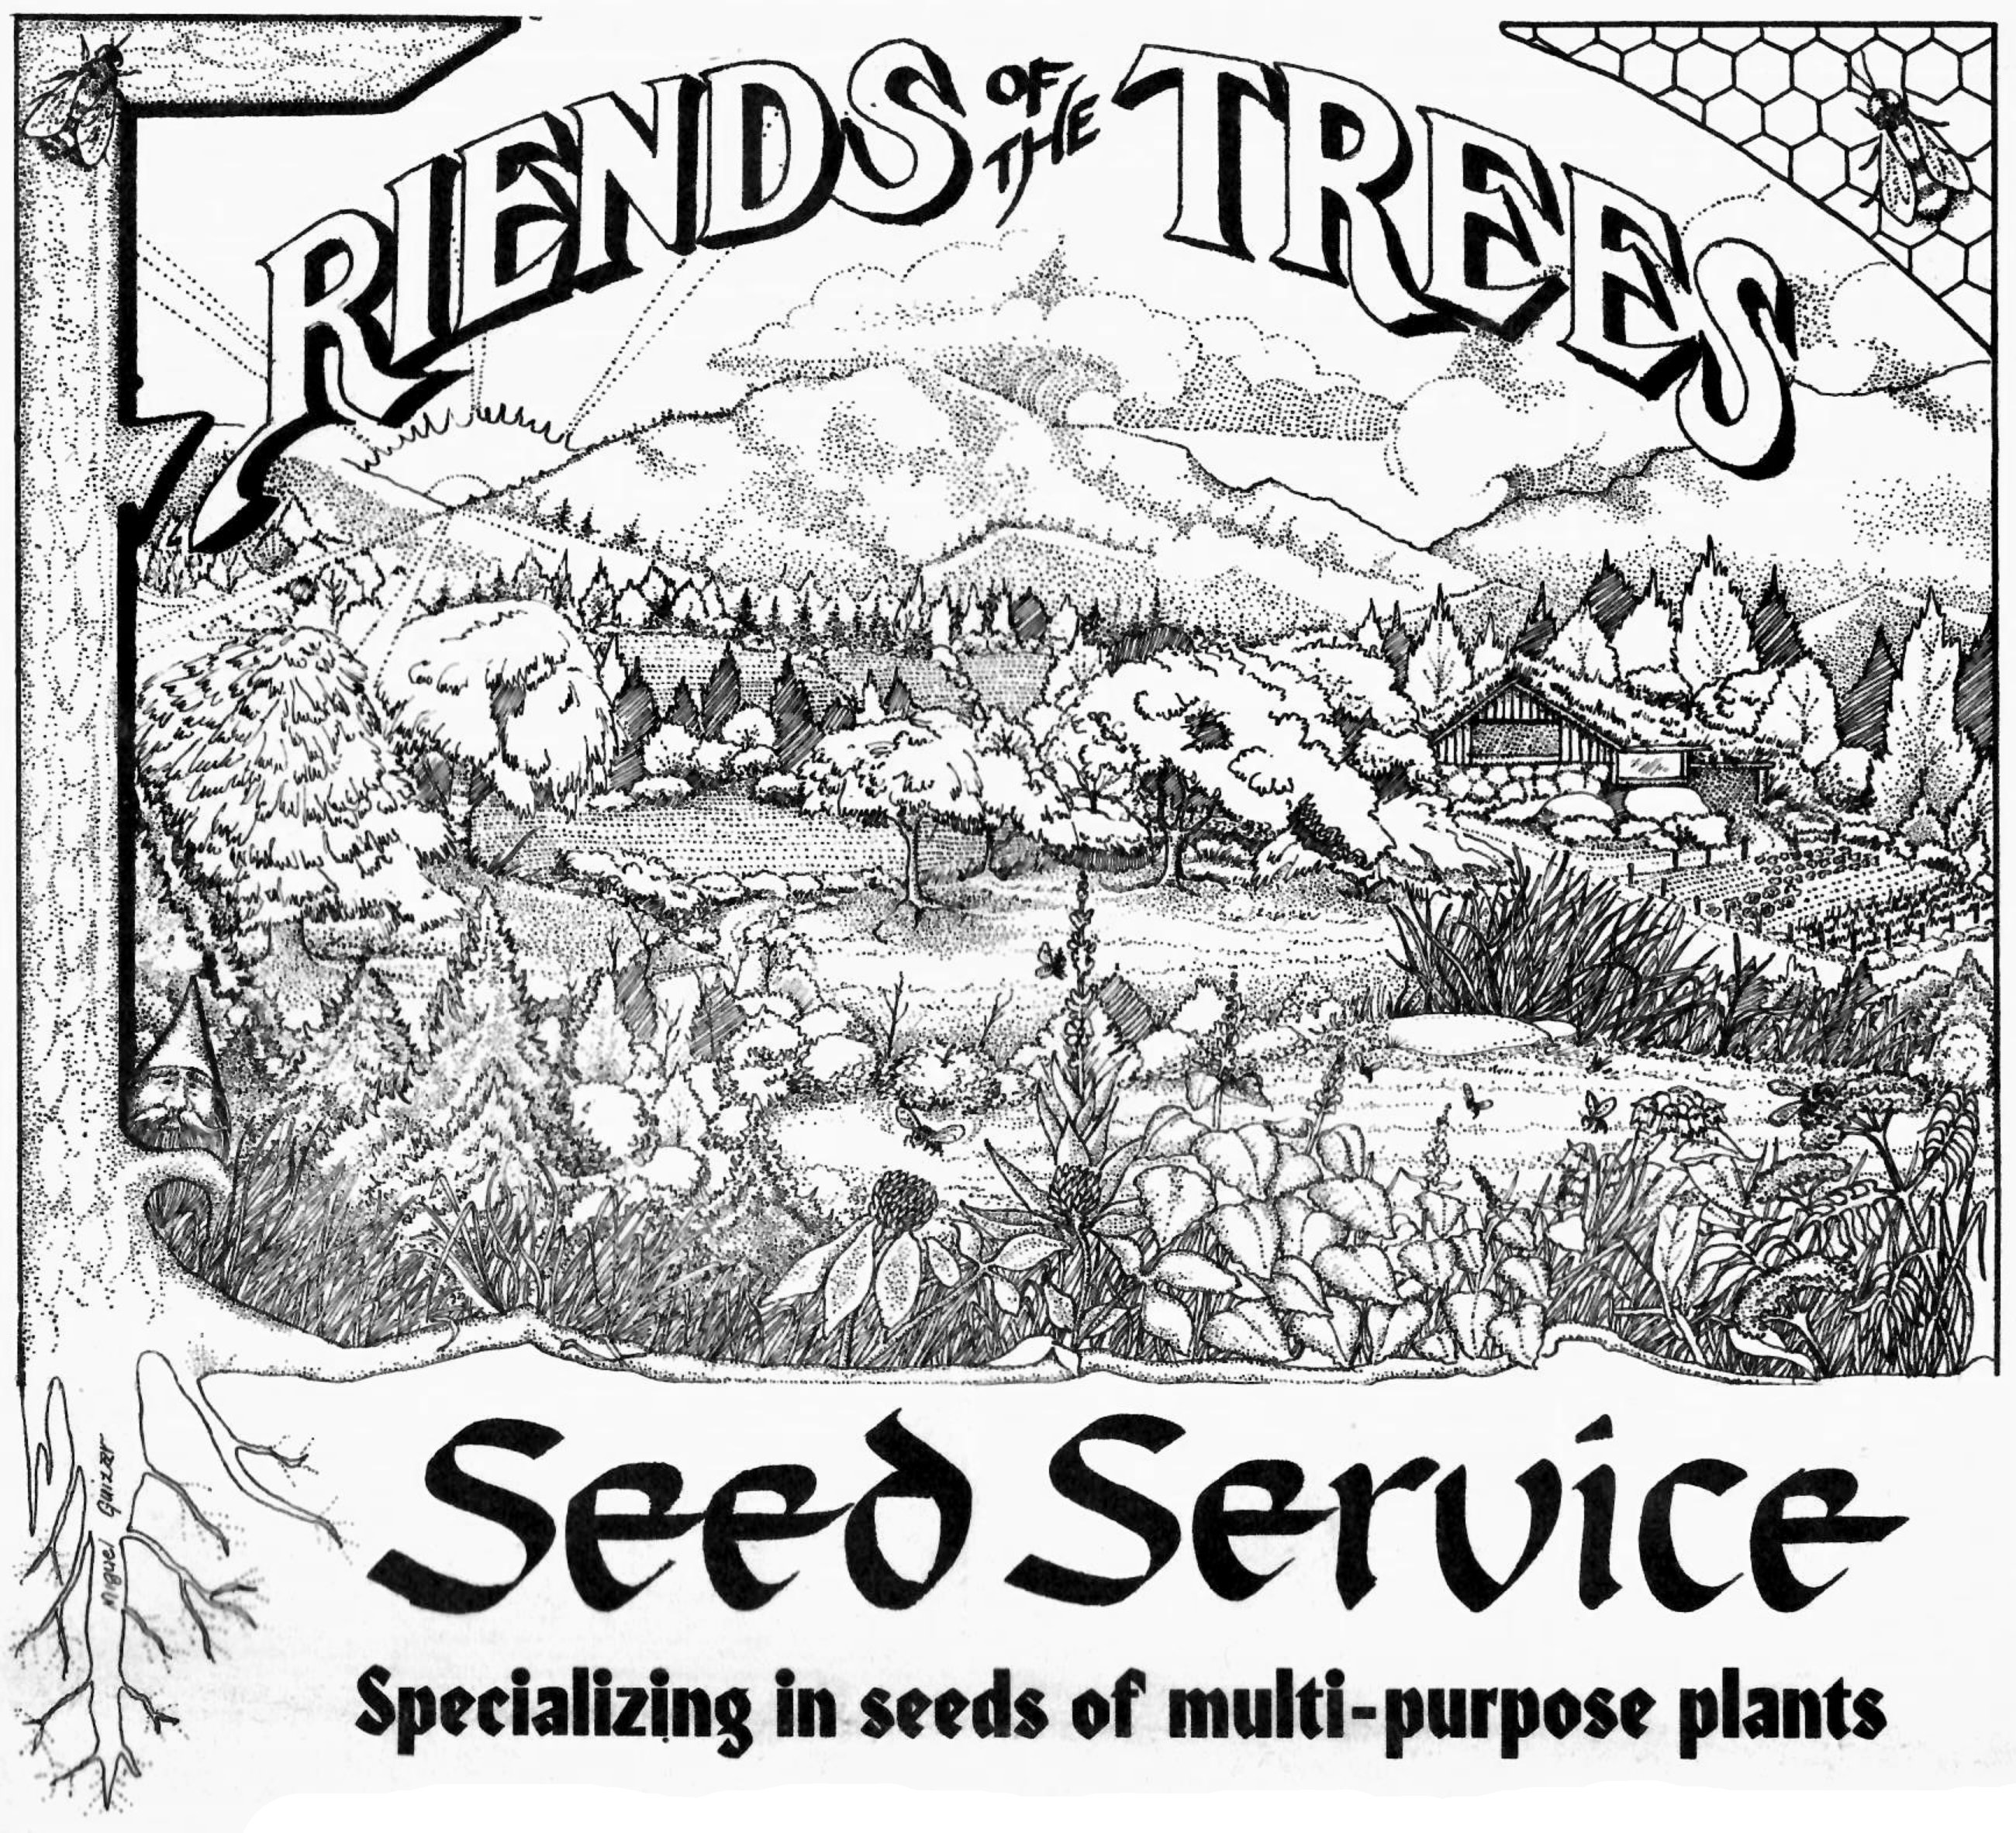 Cover of the Friends of the trees Seed Service catalog from the mid-1980's.